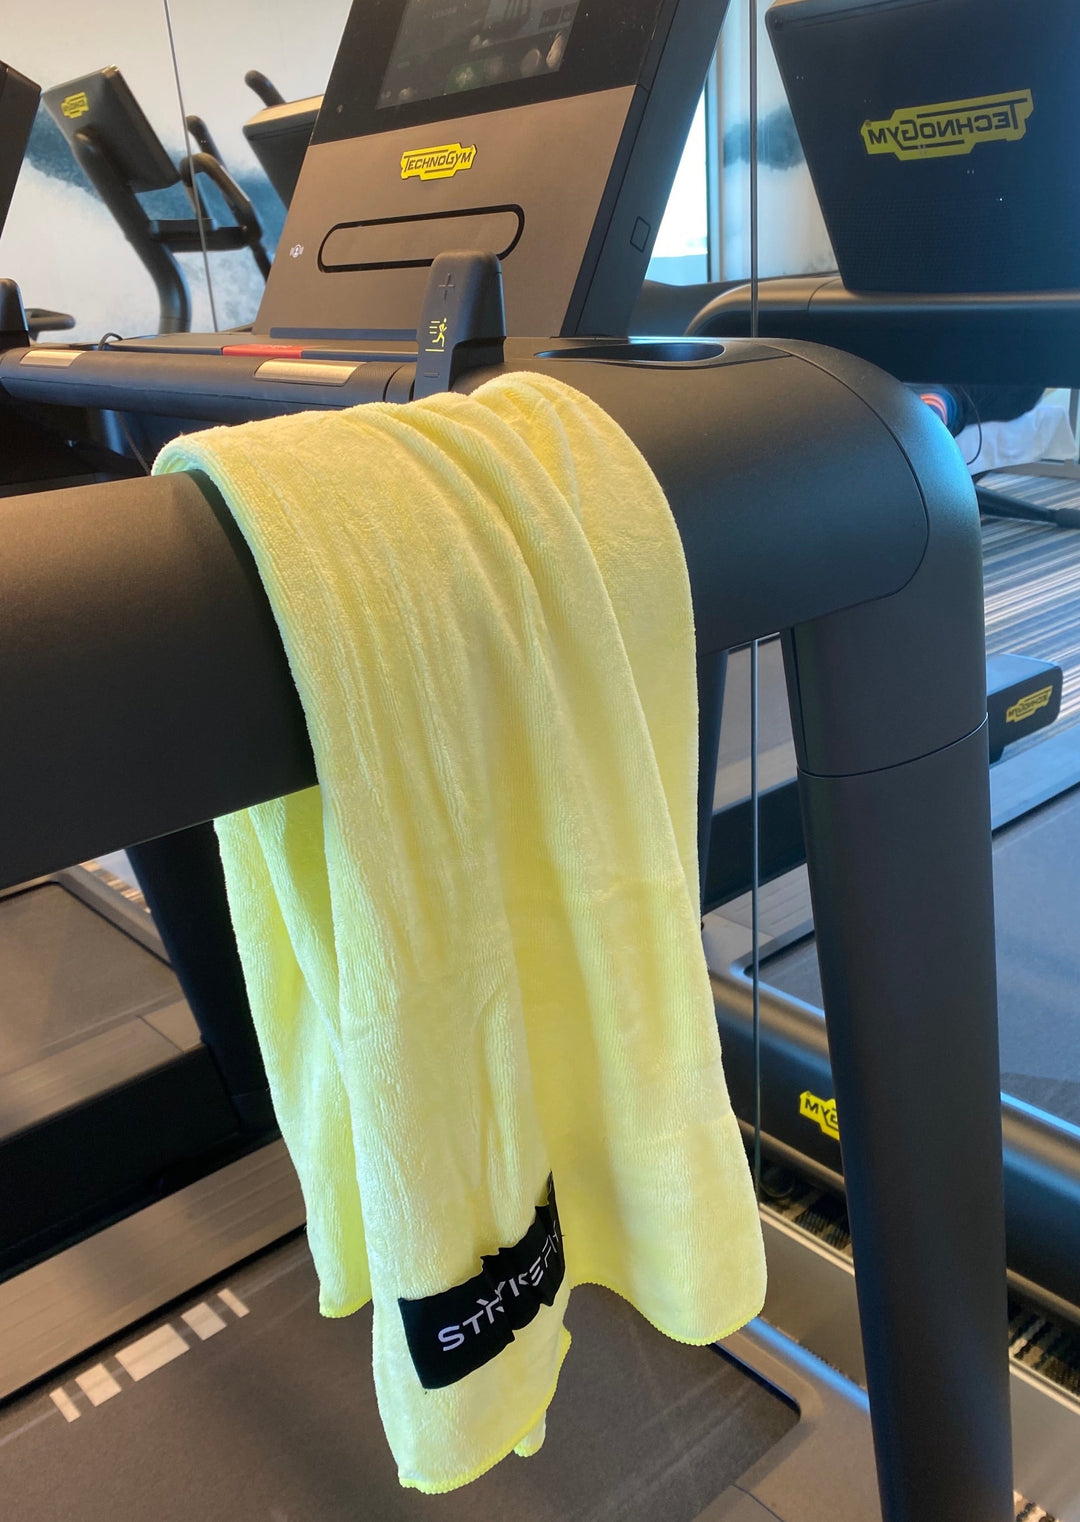 WORKOUT TOWEL  -The perfect training towel is an important part of any training session. Our towel is designed to ensure you stay dry through any workout, whether your go-to is running, yoga, pilates, gym, or any other sport. Lightweight and compact, the perfect size to throw in your training bag, this towel will be a staple.